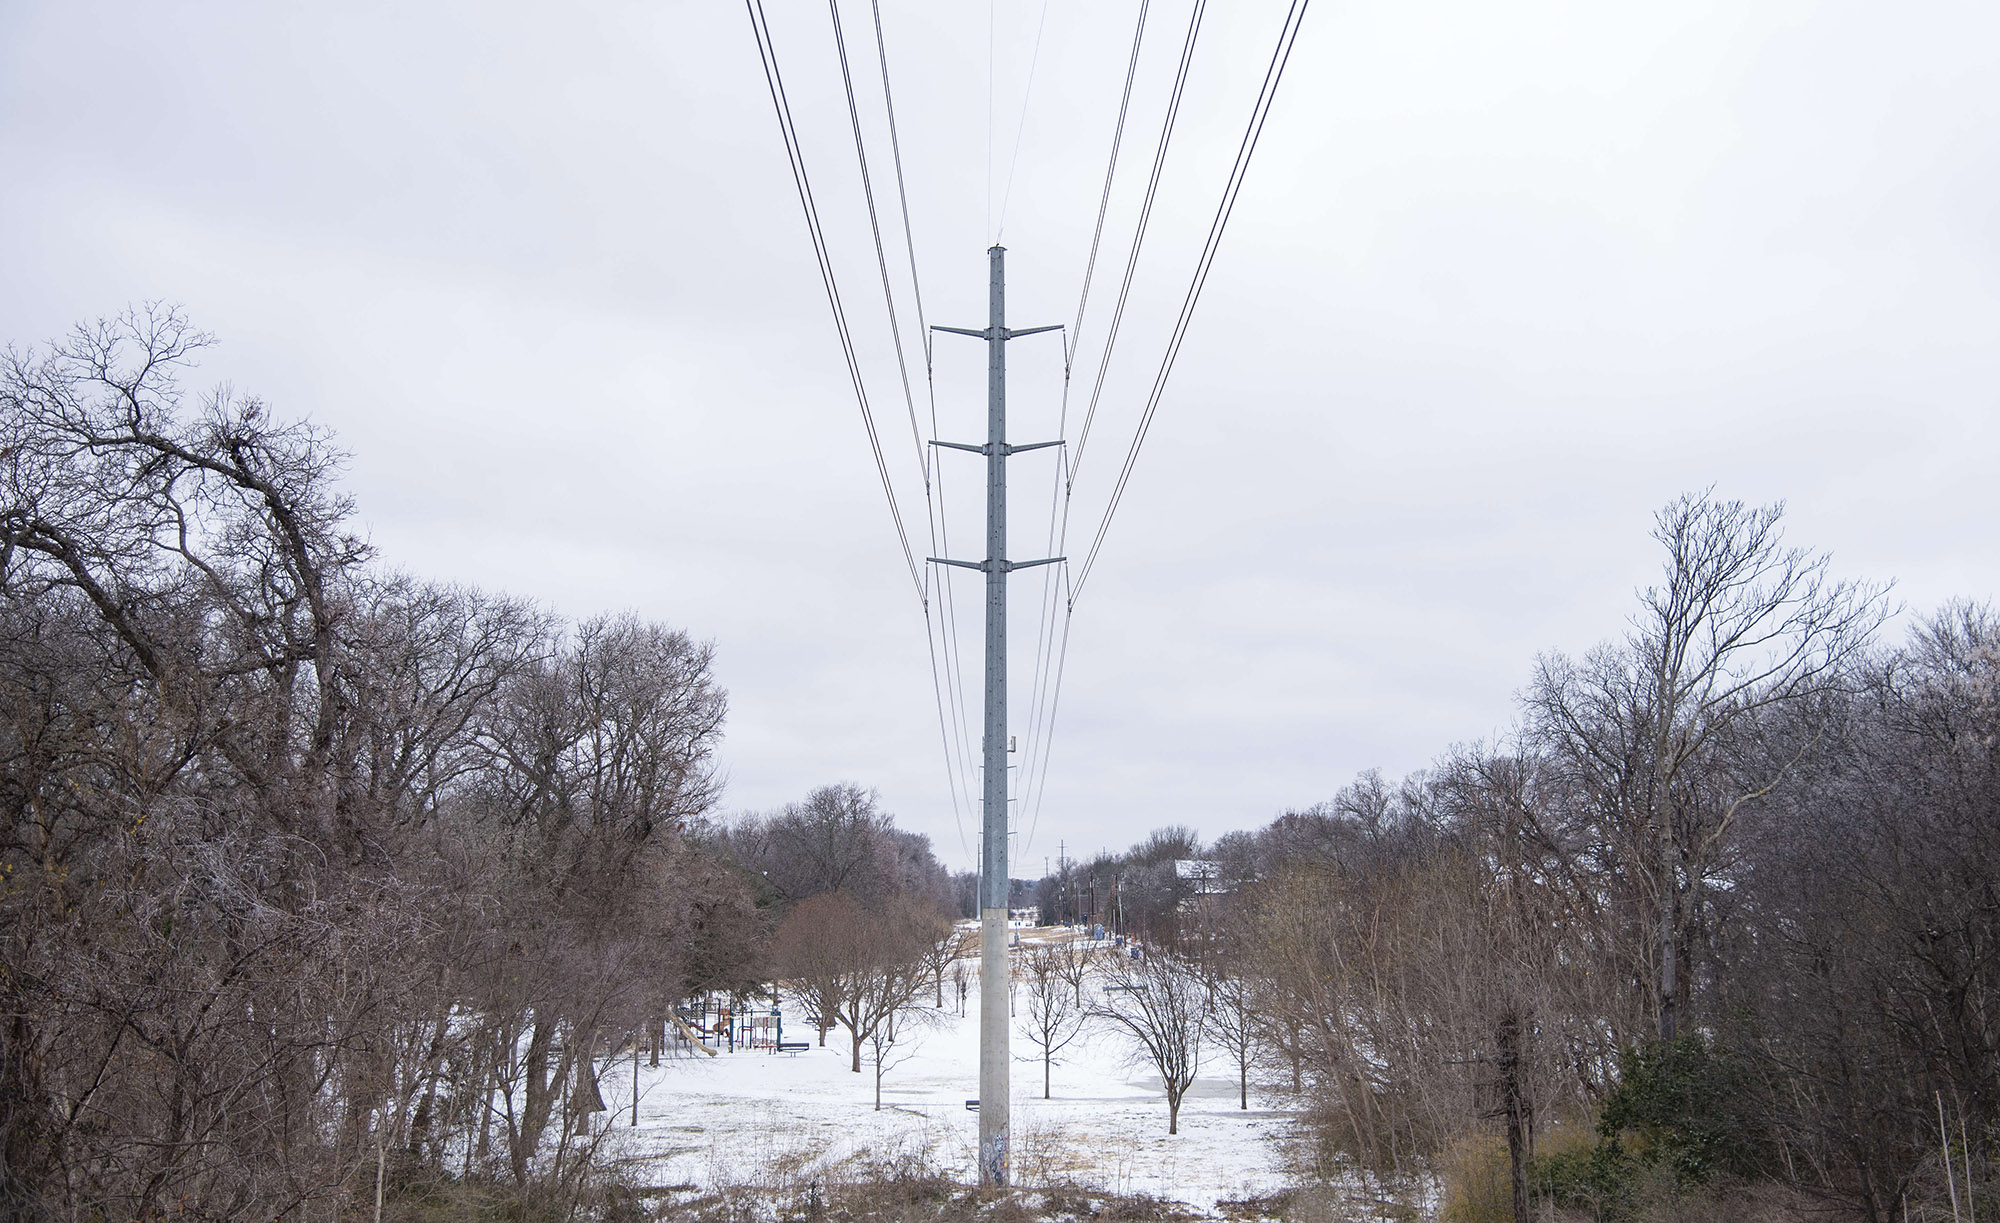 Snow lies on the ground near power lines at White Rock Lake after a winter storm in Dallas, Texas on Feb. 3.&nbsp;